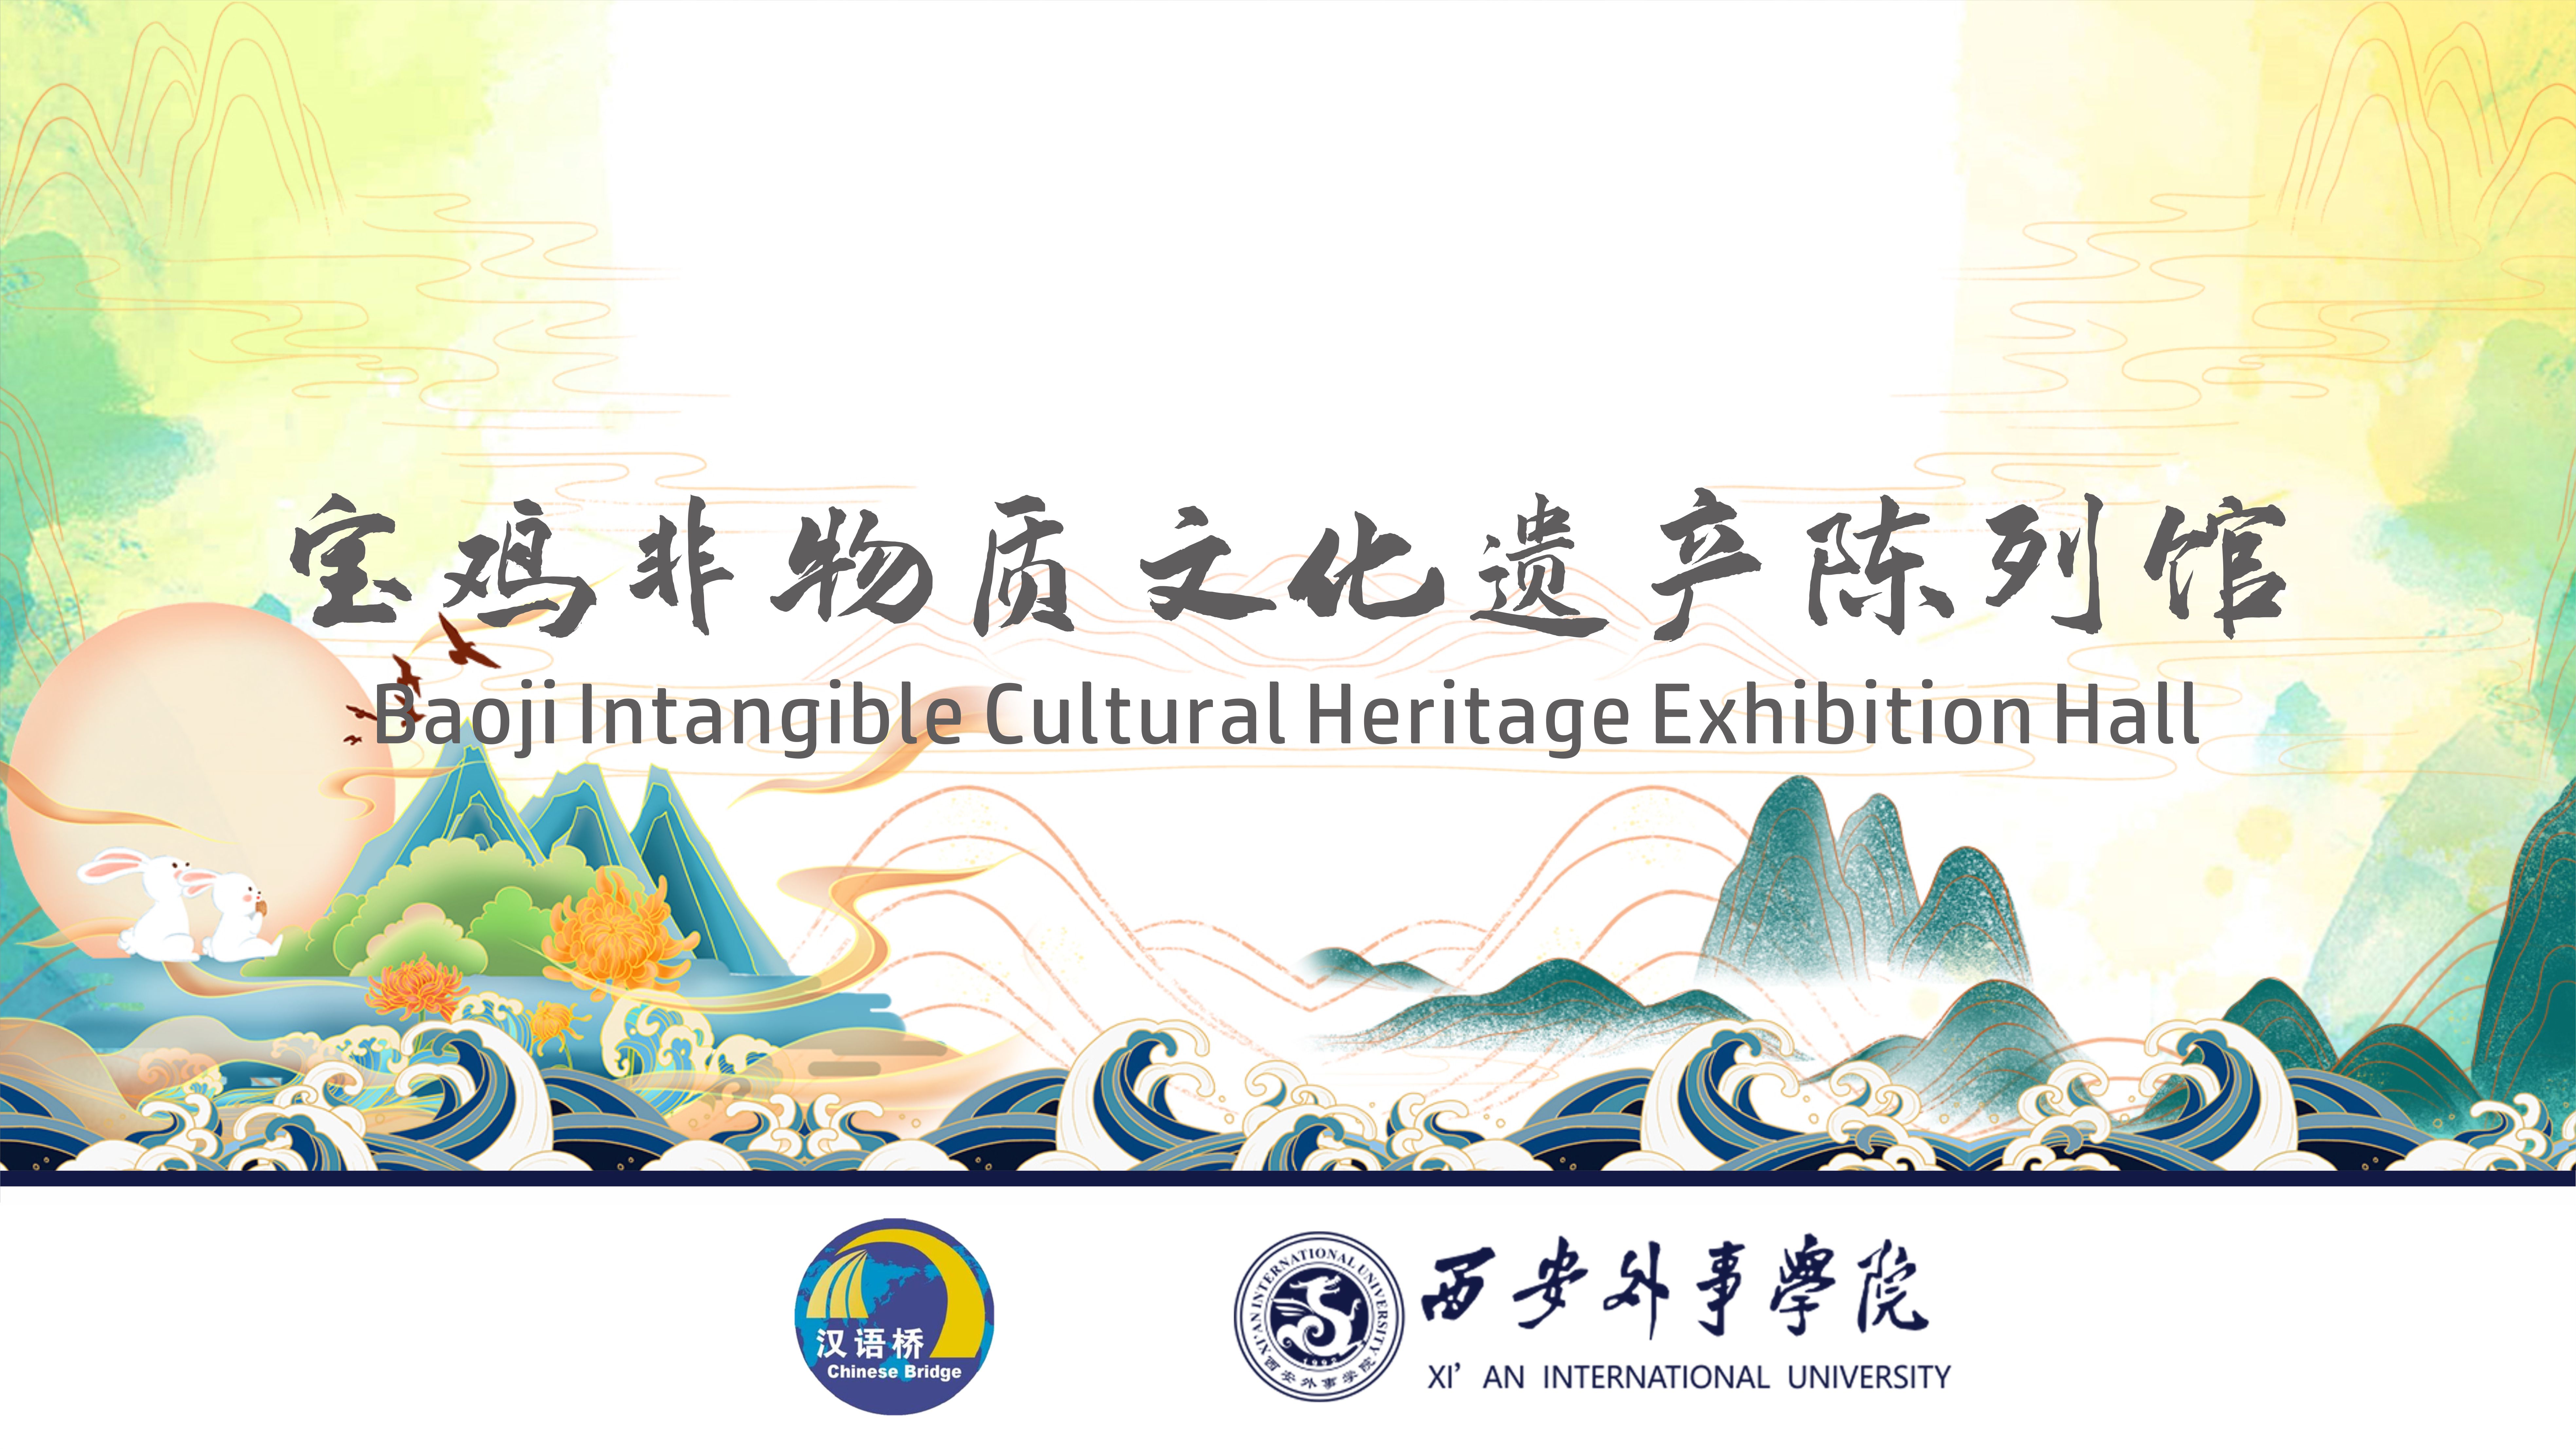 Baoji Intangible Cultural Heritage Exhibition Hall